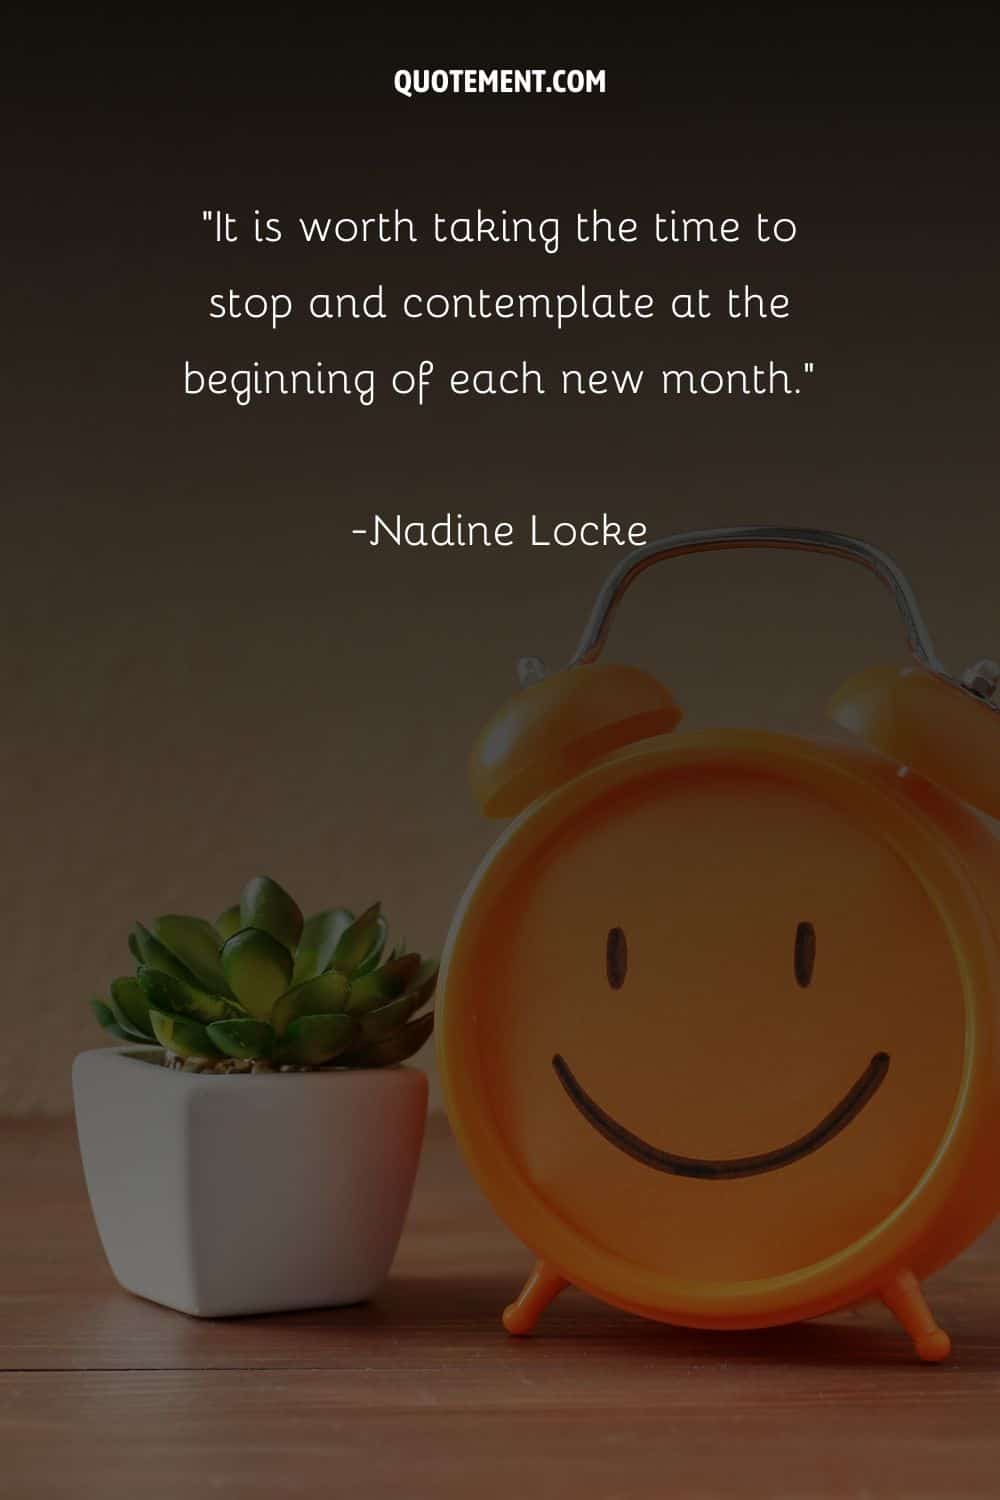 an orange clock beside a lovely succulent plant representing top new month quote